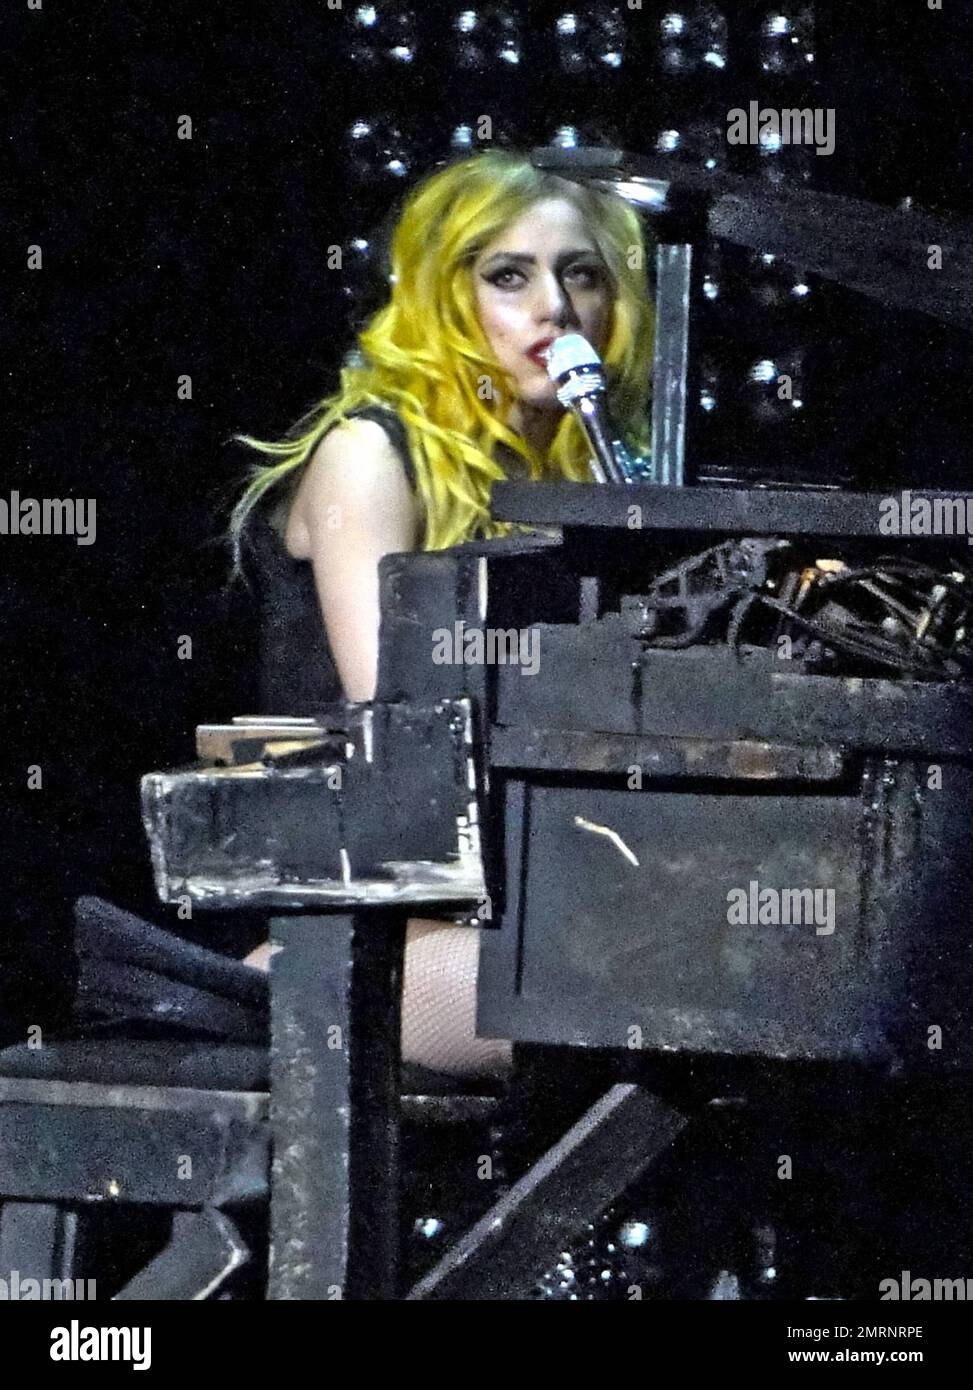 Lady Gaga continues her Monster Ball tour with a performance at the Bank  Atlantic Center. The tour includes a wide variety of set and costume  changes, including the flaming piano, from which